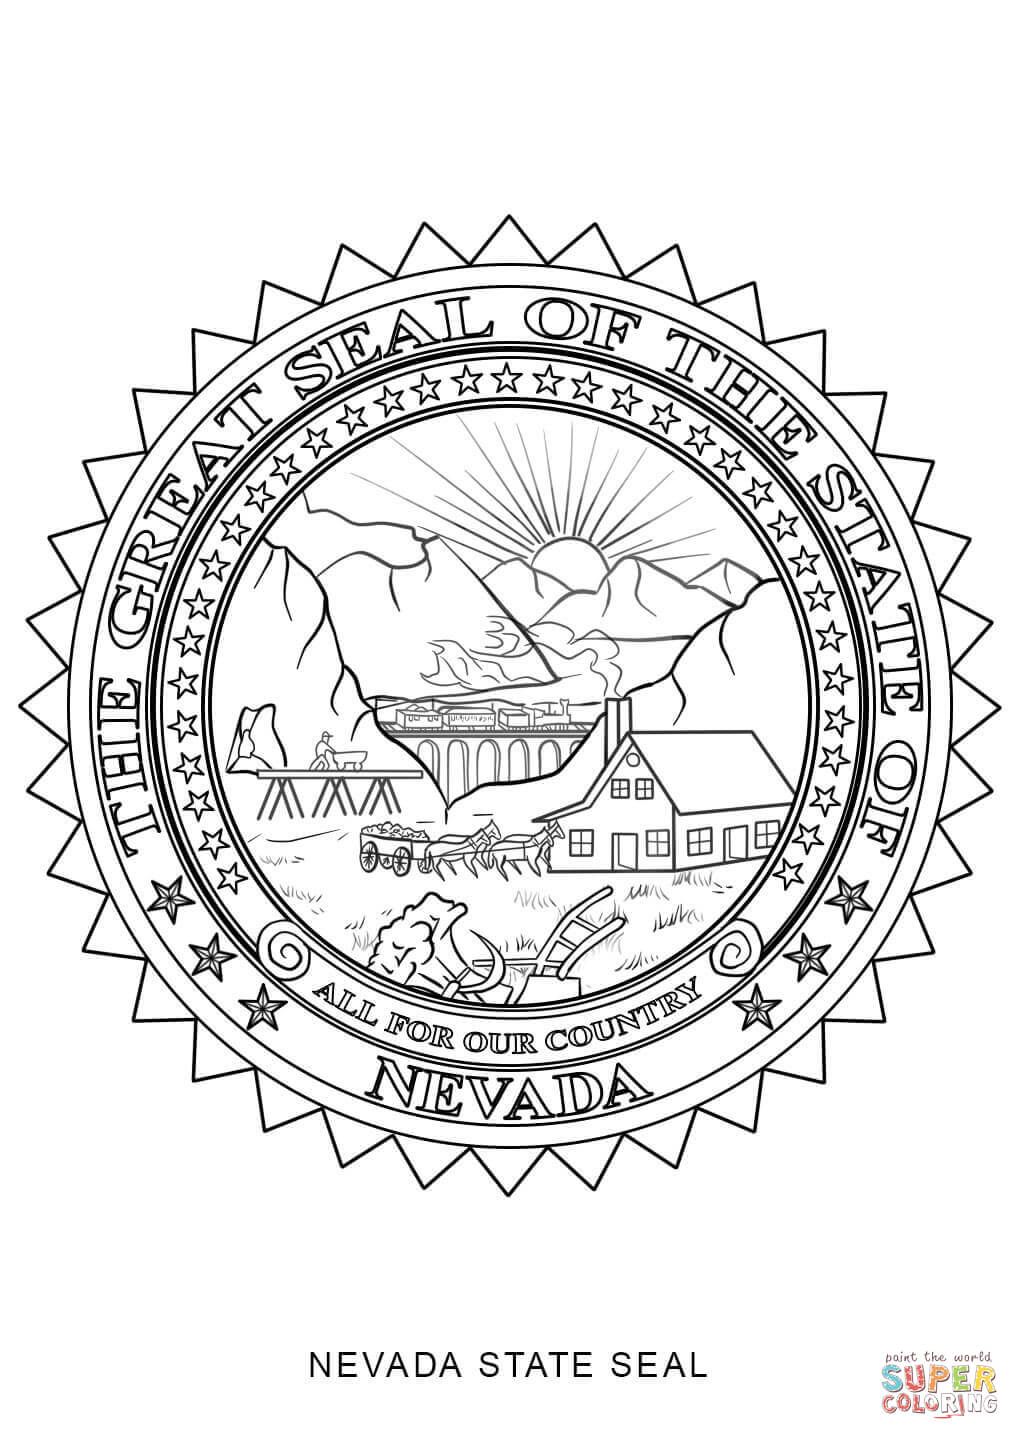 Nevada state seal coloring page sketch coloring page flag coloring pages nevada state coloring pages